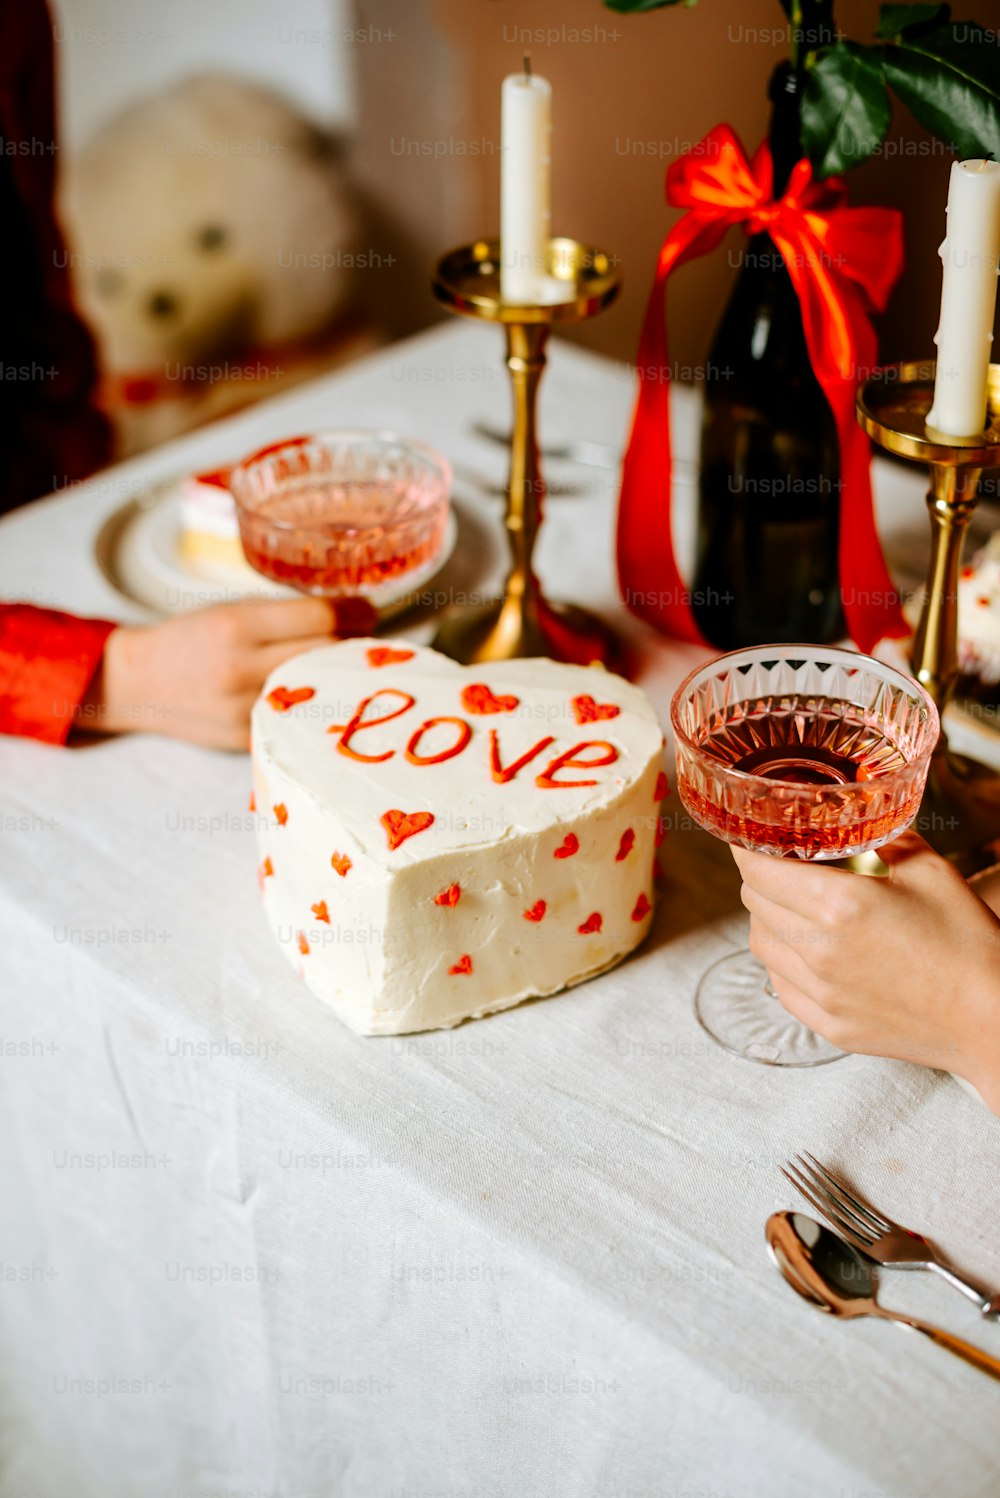 a table topped with a cake and two glasses of wine